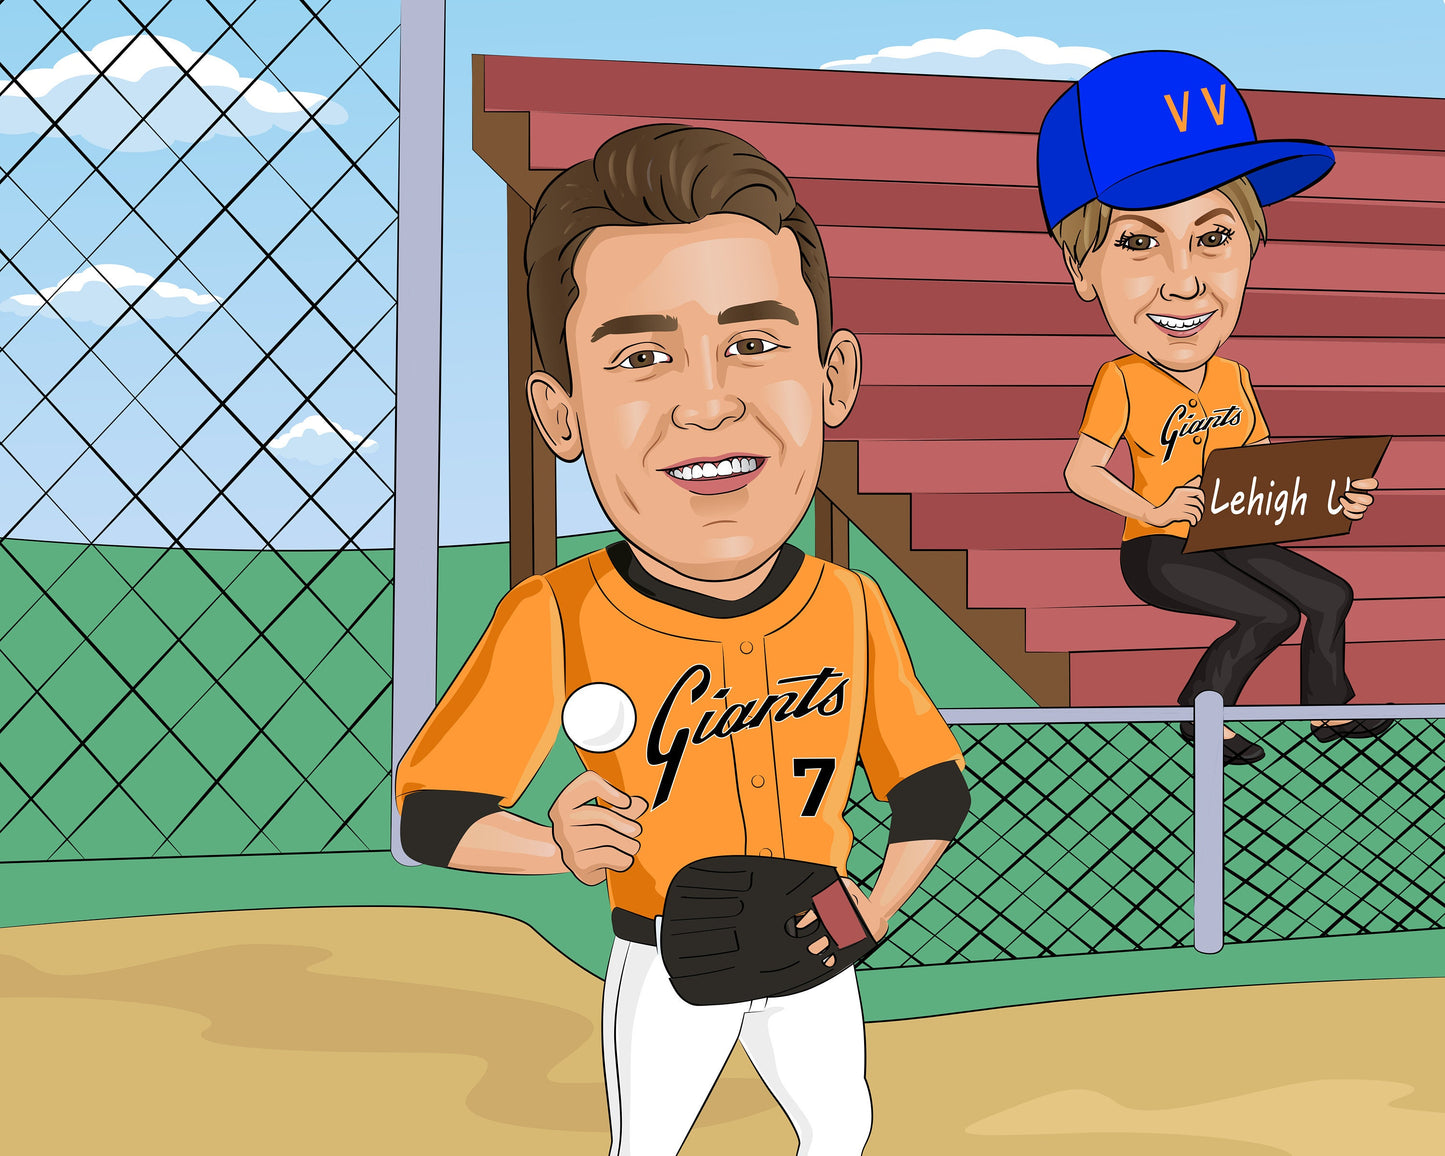 Baseball coach gift - Custom Caricature Portrait From Your Photo/Baseball Player gift